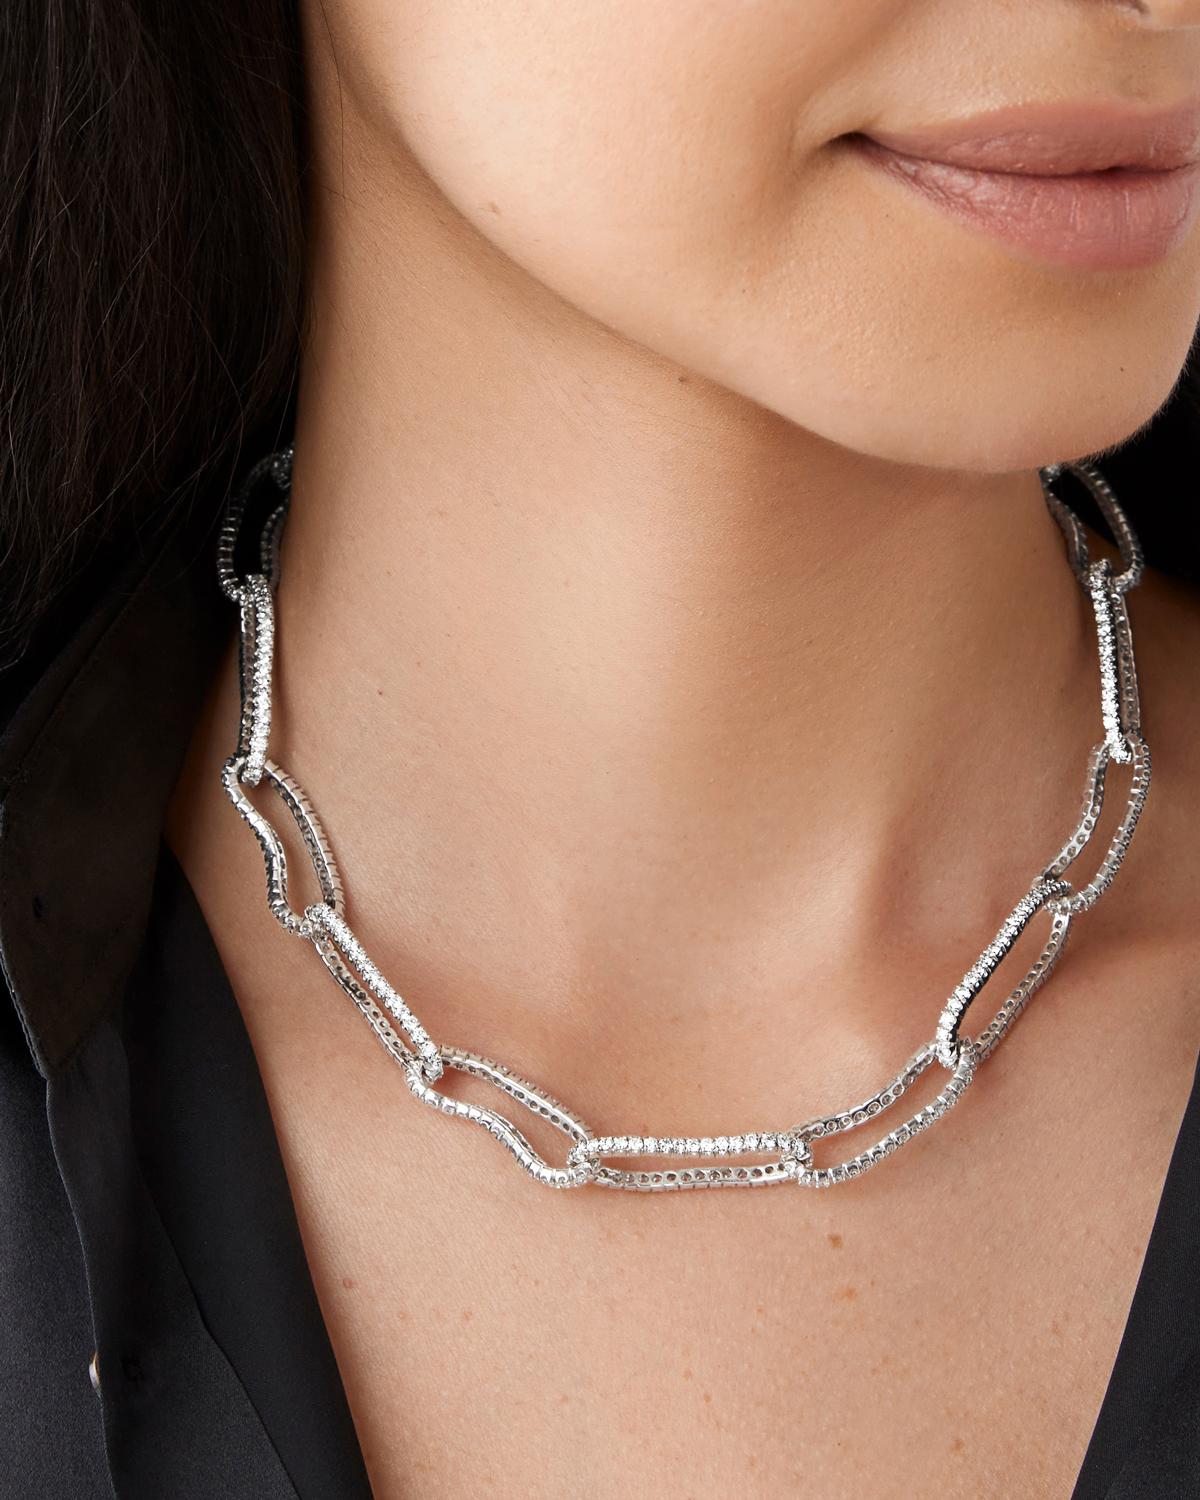 Crushed Link Necklace is made from 18k White Gold with VS white diamonds set along crushed links. Features 16 in custom link closure as pictured.

Width: 13mm

Please note the possibility of natural inclusions in gemstones

Made in the USA